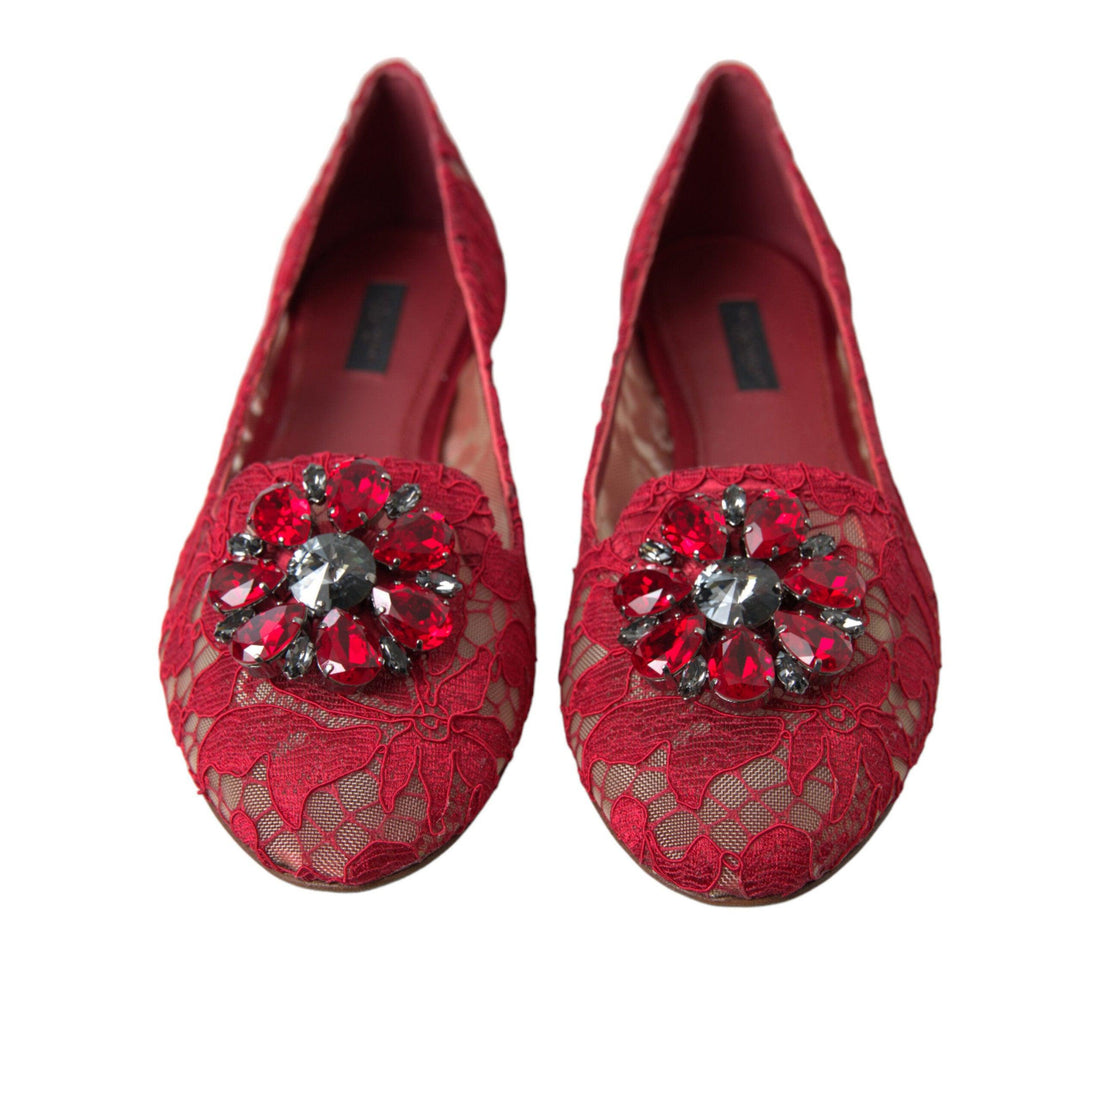 Dolce & Gabbana Red Vally Taormina Lace Crystals Flats Shoes